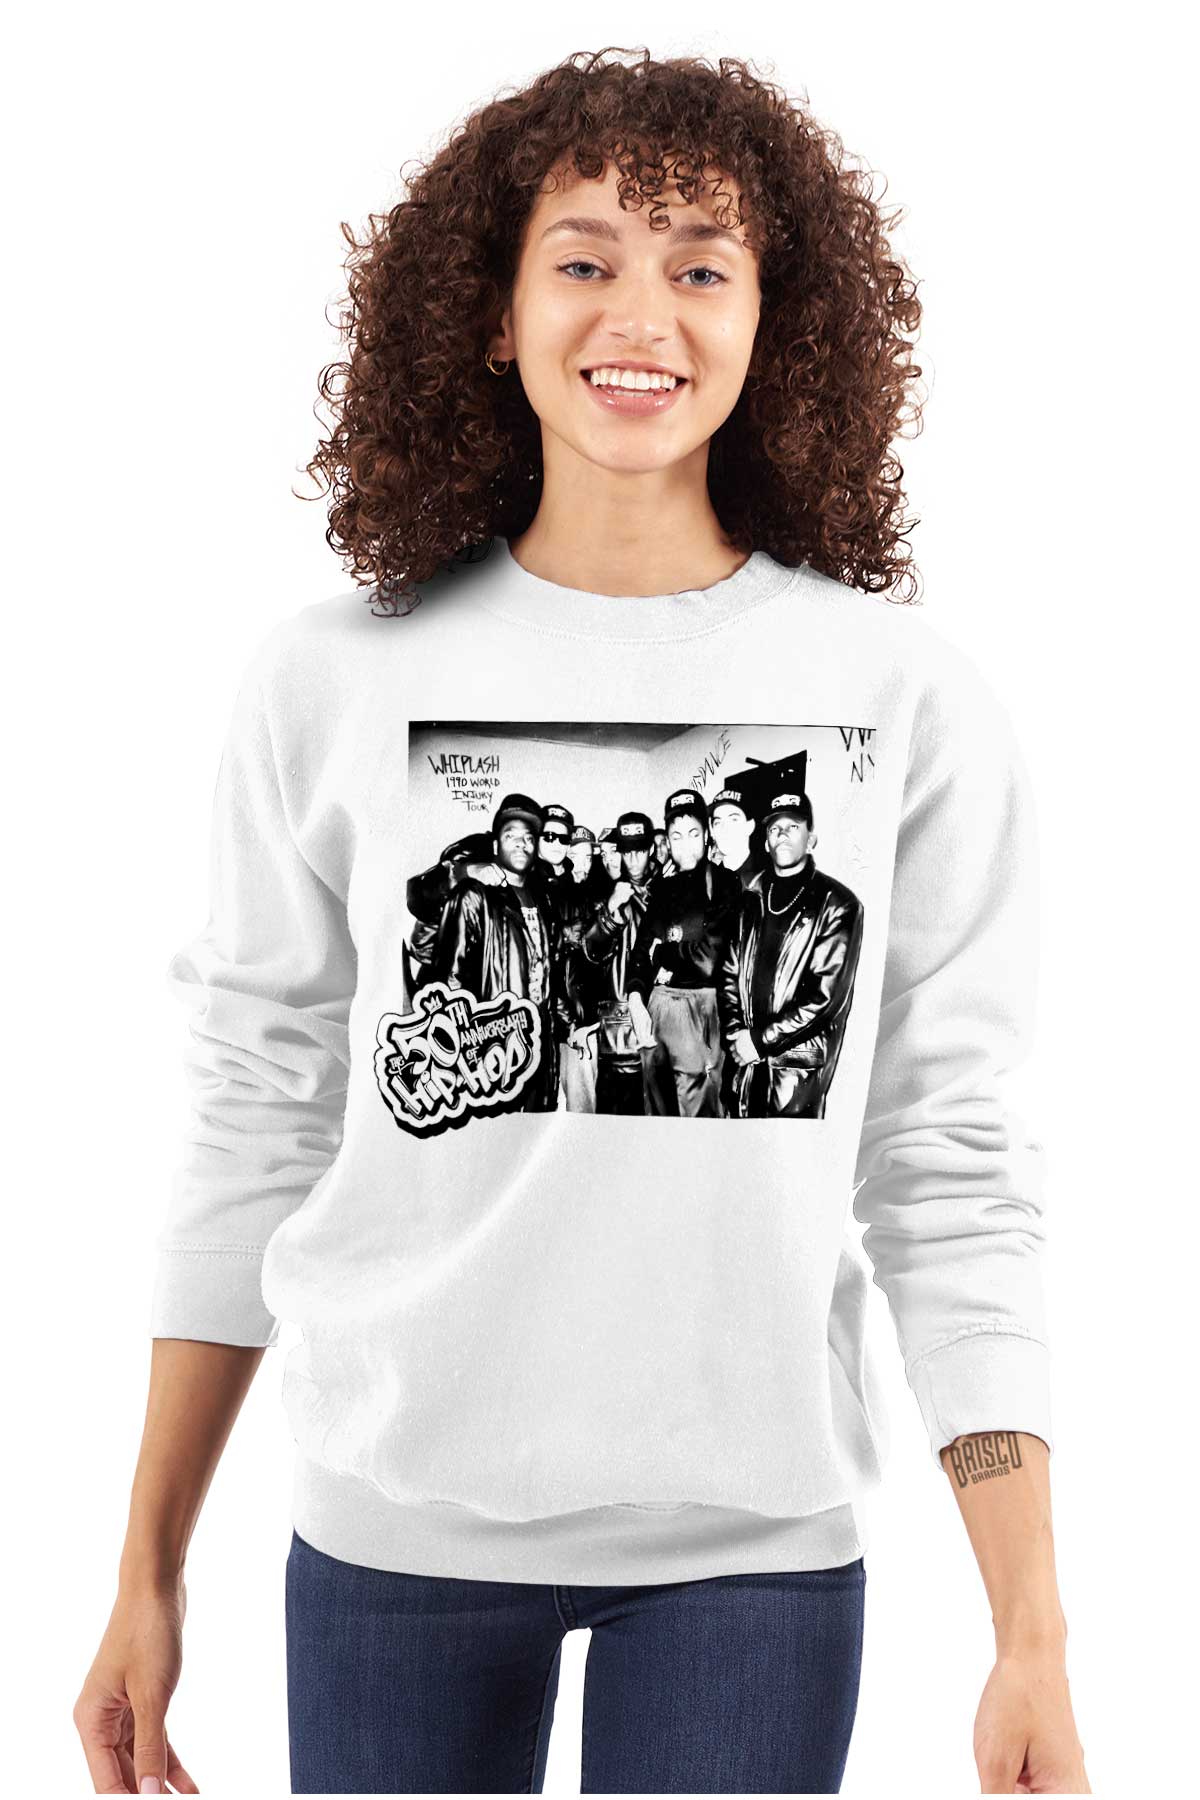 The image is a tribute to iconic hip-hop figures from the Whiplash 1990 era, including Donald-D, Henge-E, Kamanchisly, Ice-T, and DJ-Supreme, showcasing the influence and history of hip-hop.